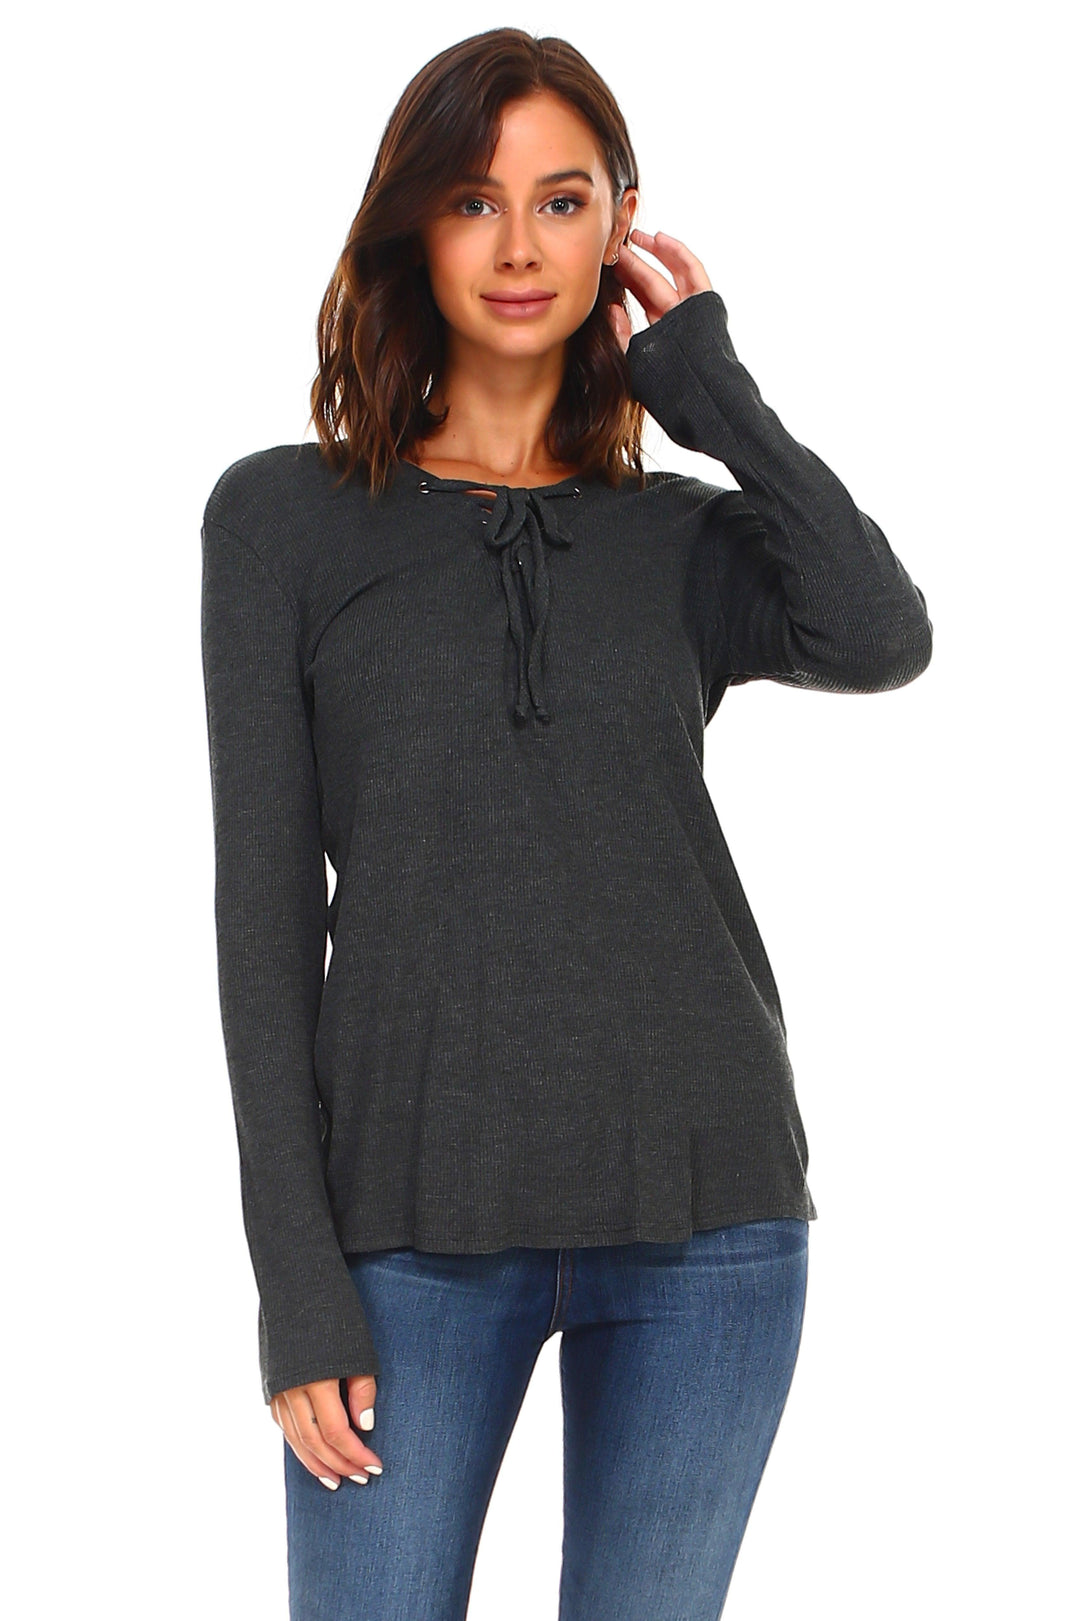 Women's Lace Up Long Sleeve Top - Brand My Case